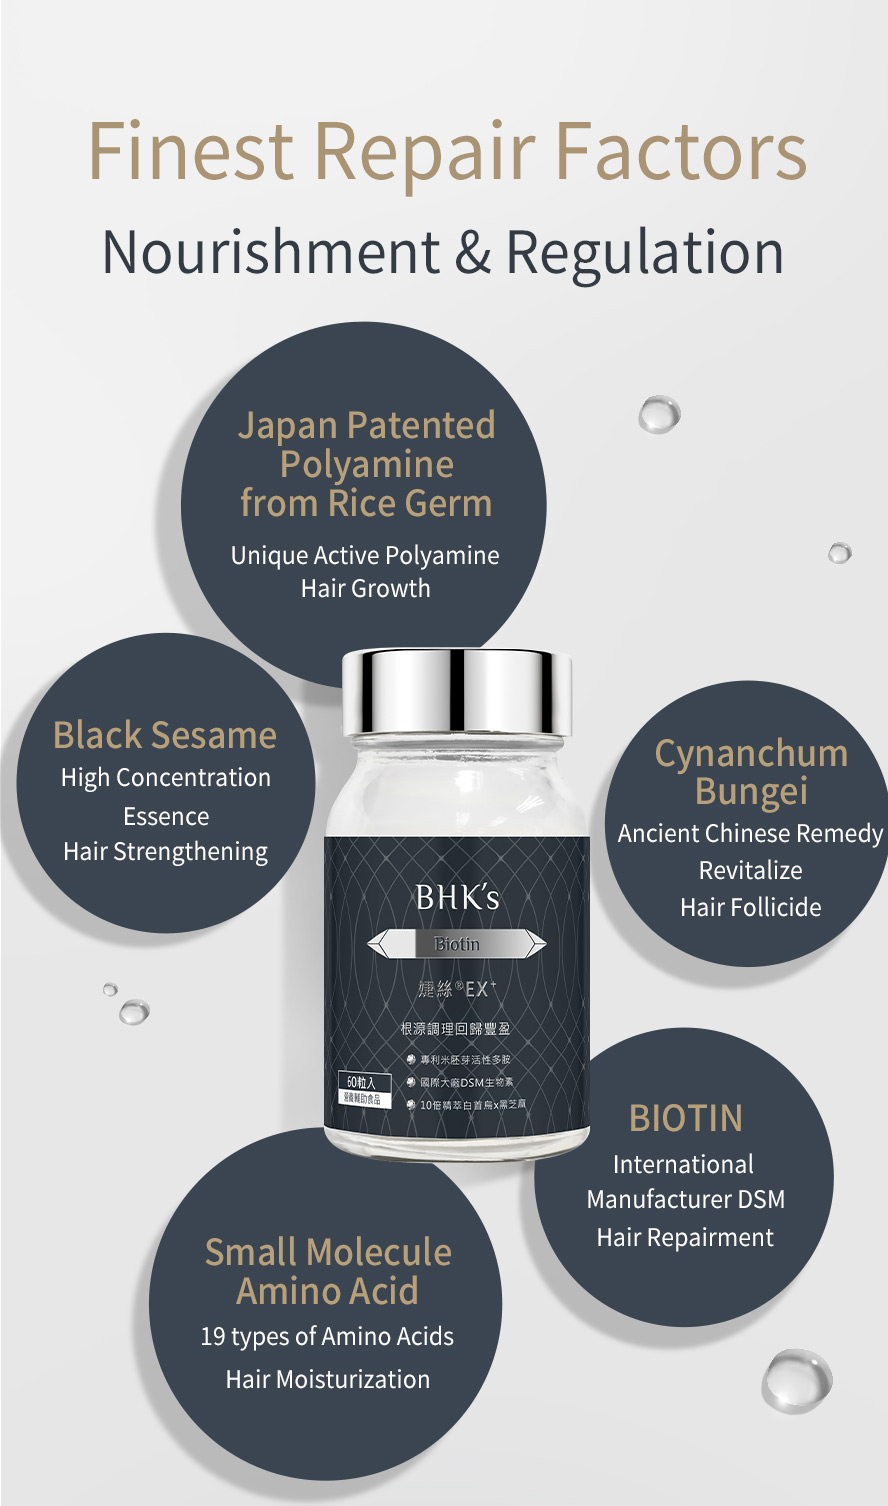 BHKs biotin is an innovative product for hair treatment and stimulates hair growth.